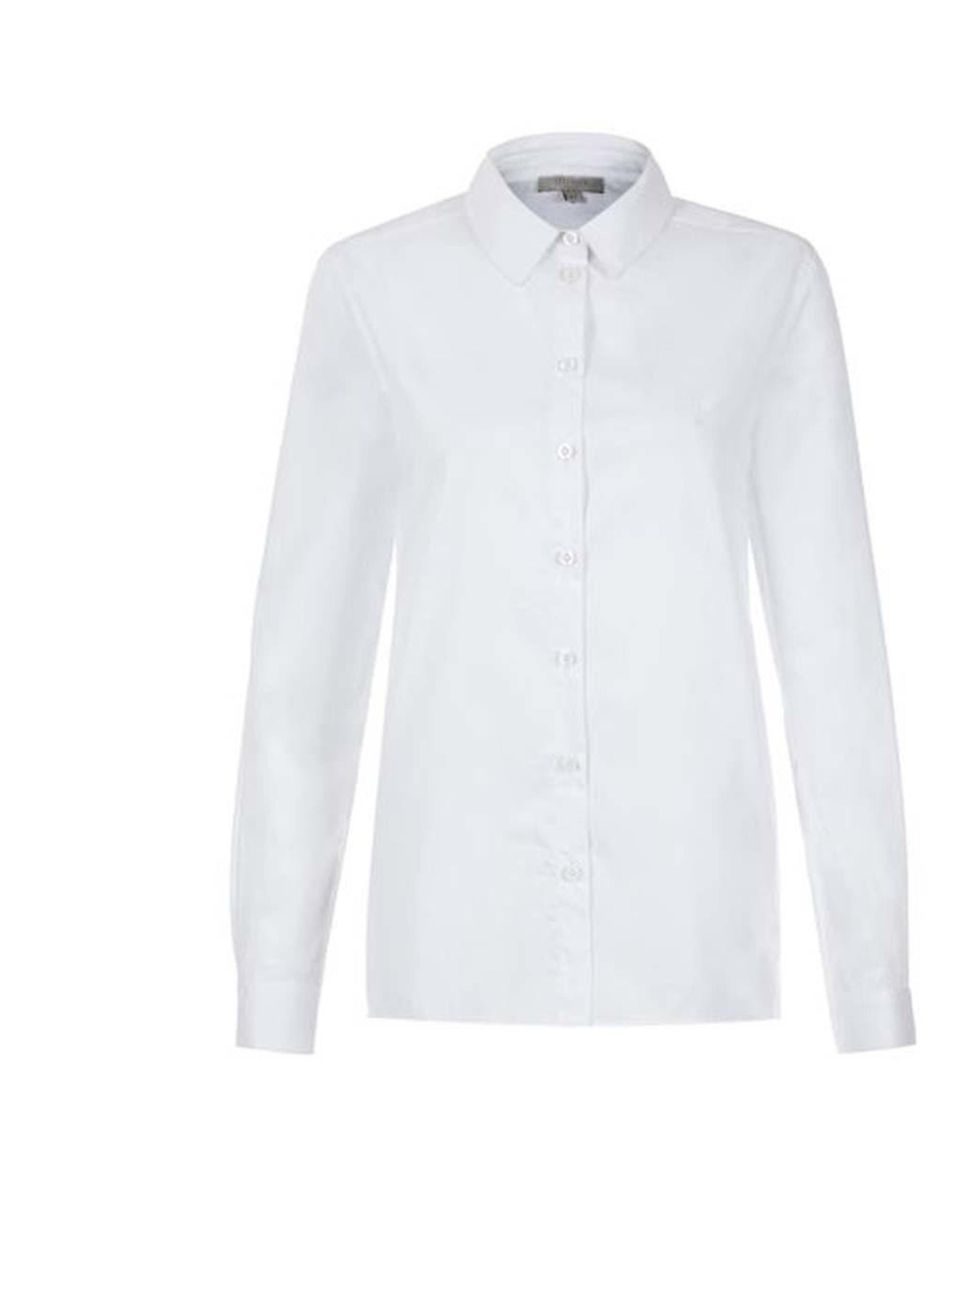 <p>Add a white classic shirt for a sophisticated look.</p><p>Get this one from <a href="http://www.hobbs.co.uk/product/display?productID=0213-6355-3428L00&amp;productvarid=0213-6355-3428L00-WHITE-14&amp;refpage=tops/shirts">Hobbs</a>, £63.20</p>